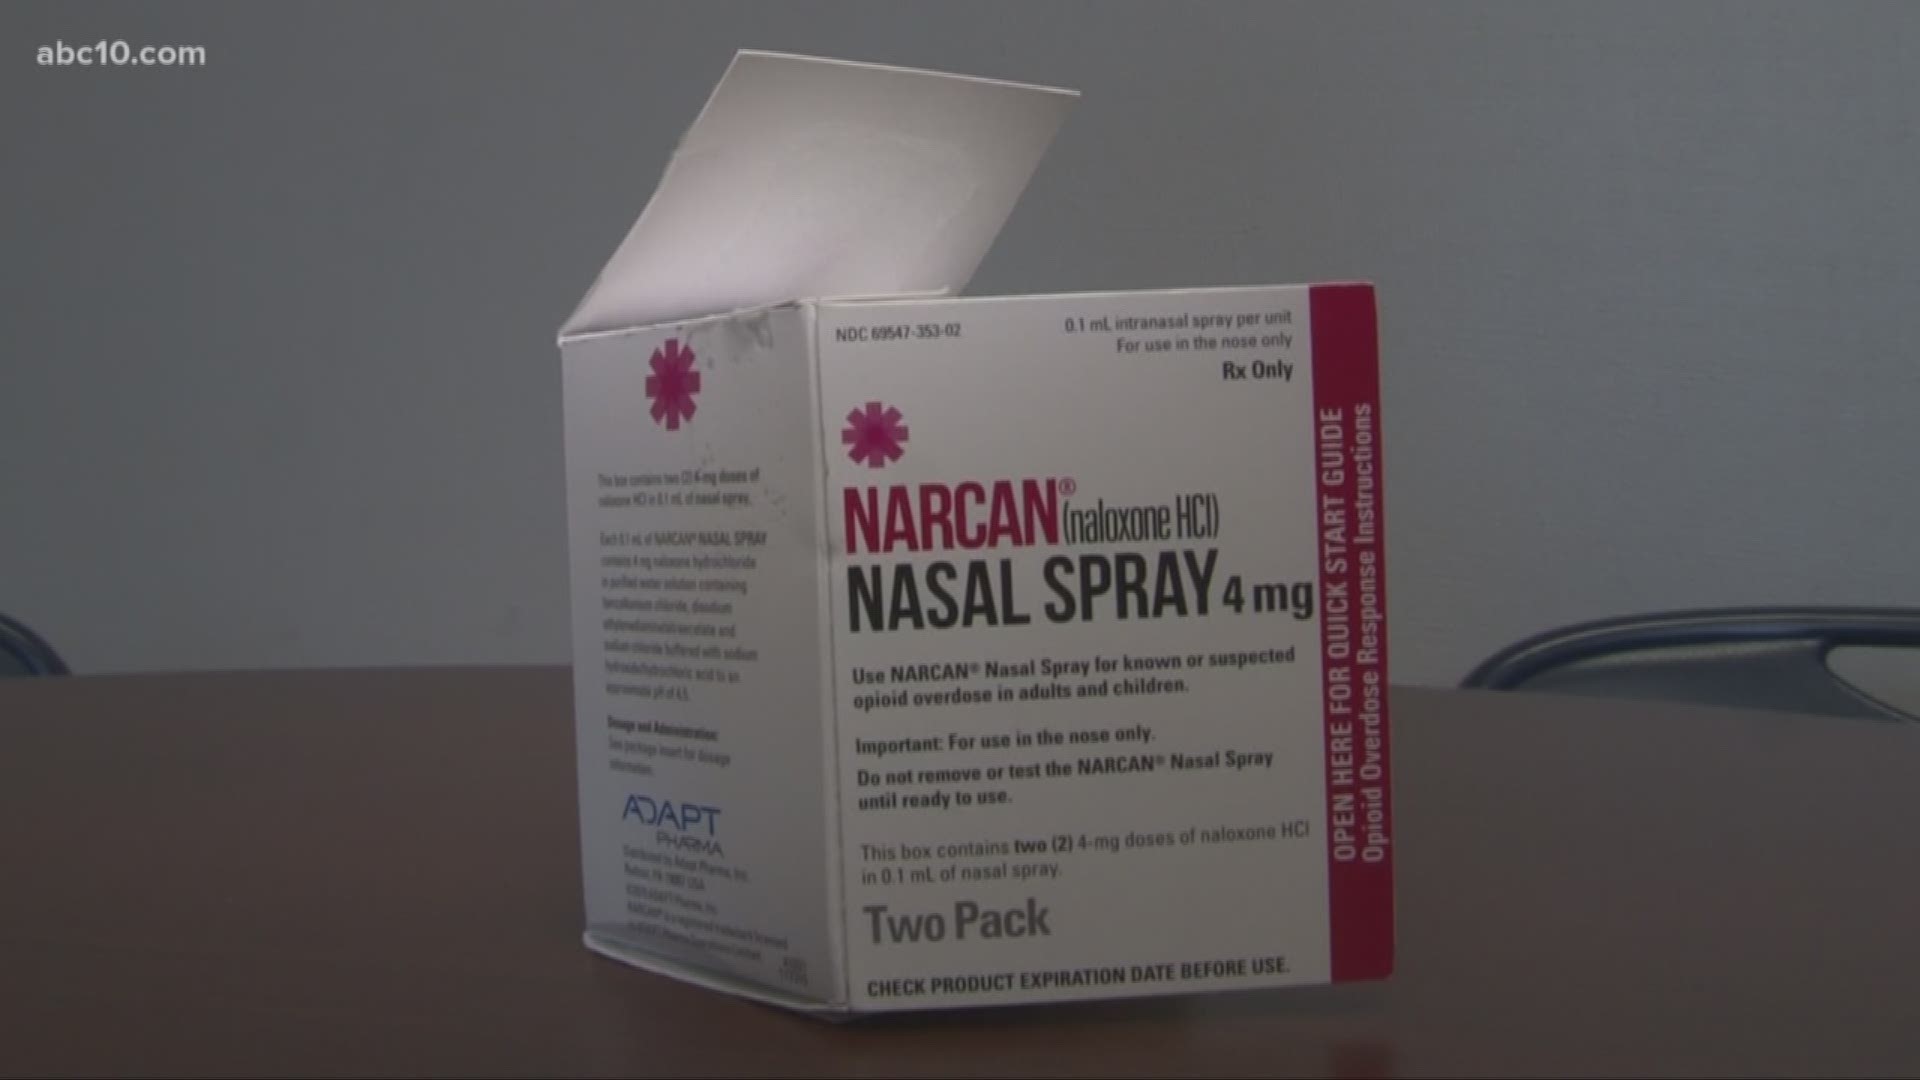 The San Joaquin County Health Department is distributing Naloxone, better known as "Narcan", in an effort to stem opioid overdoses.